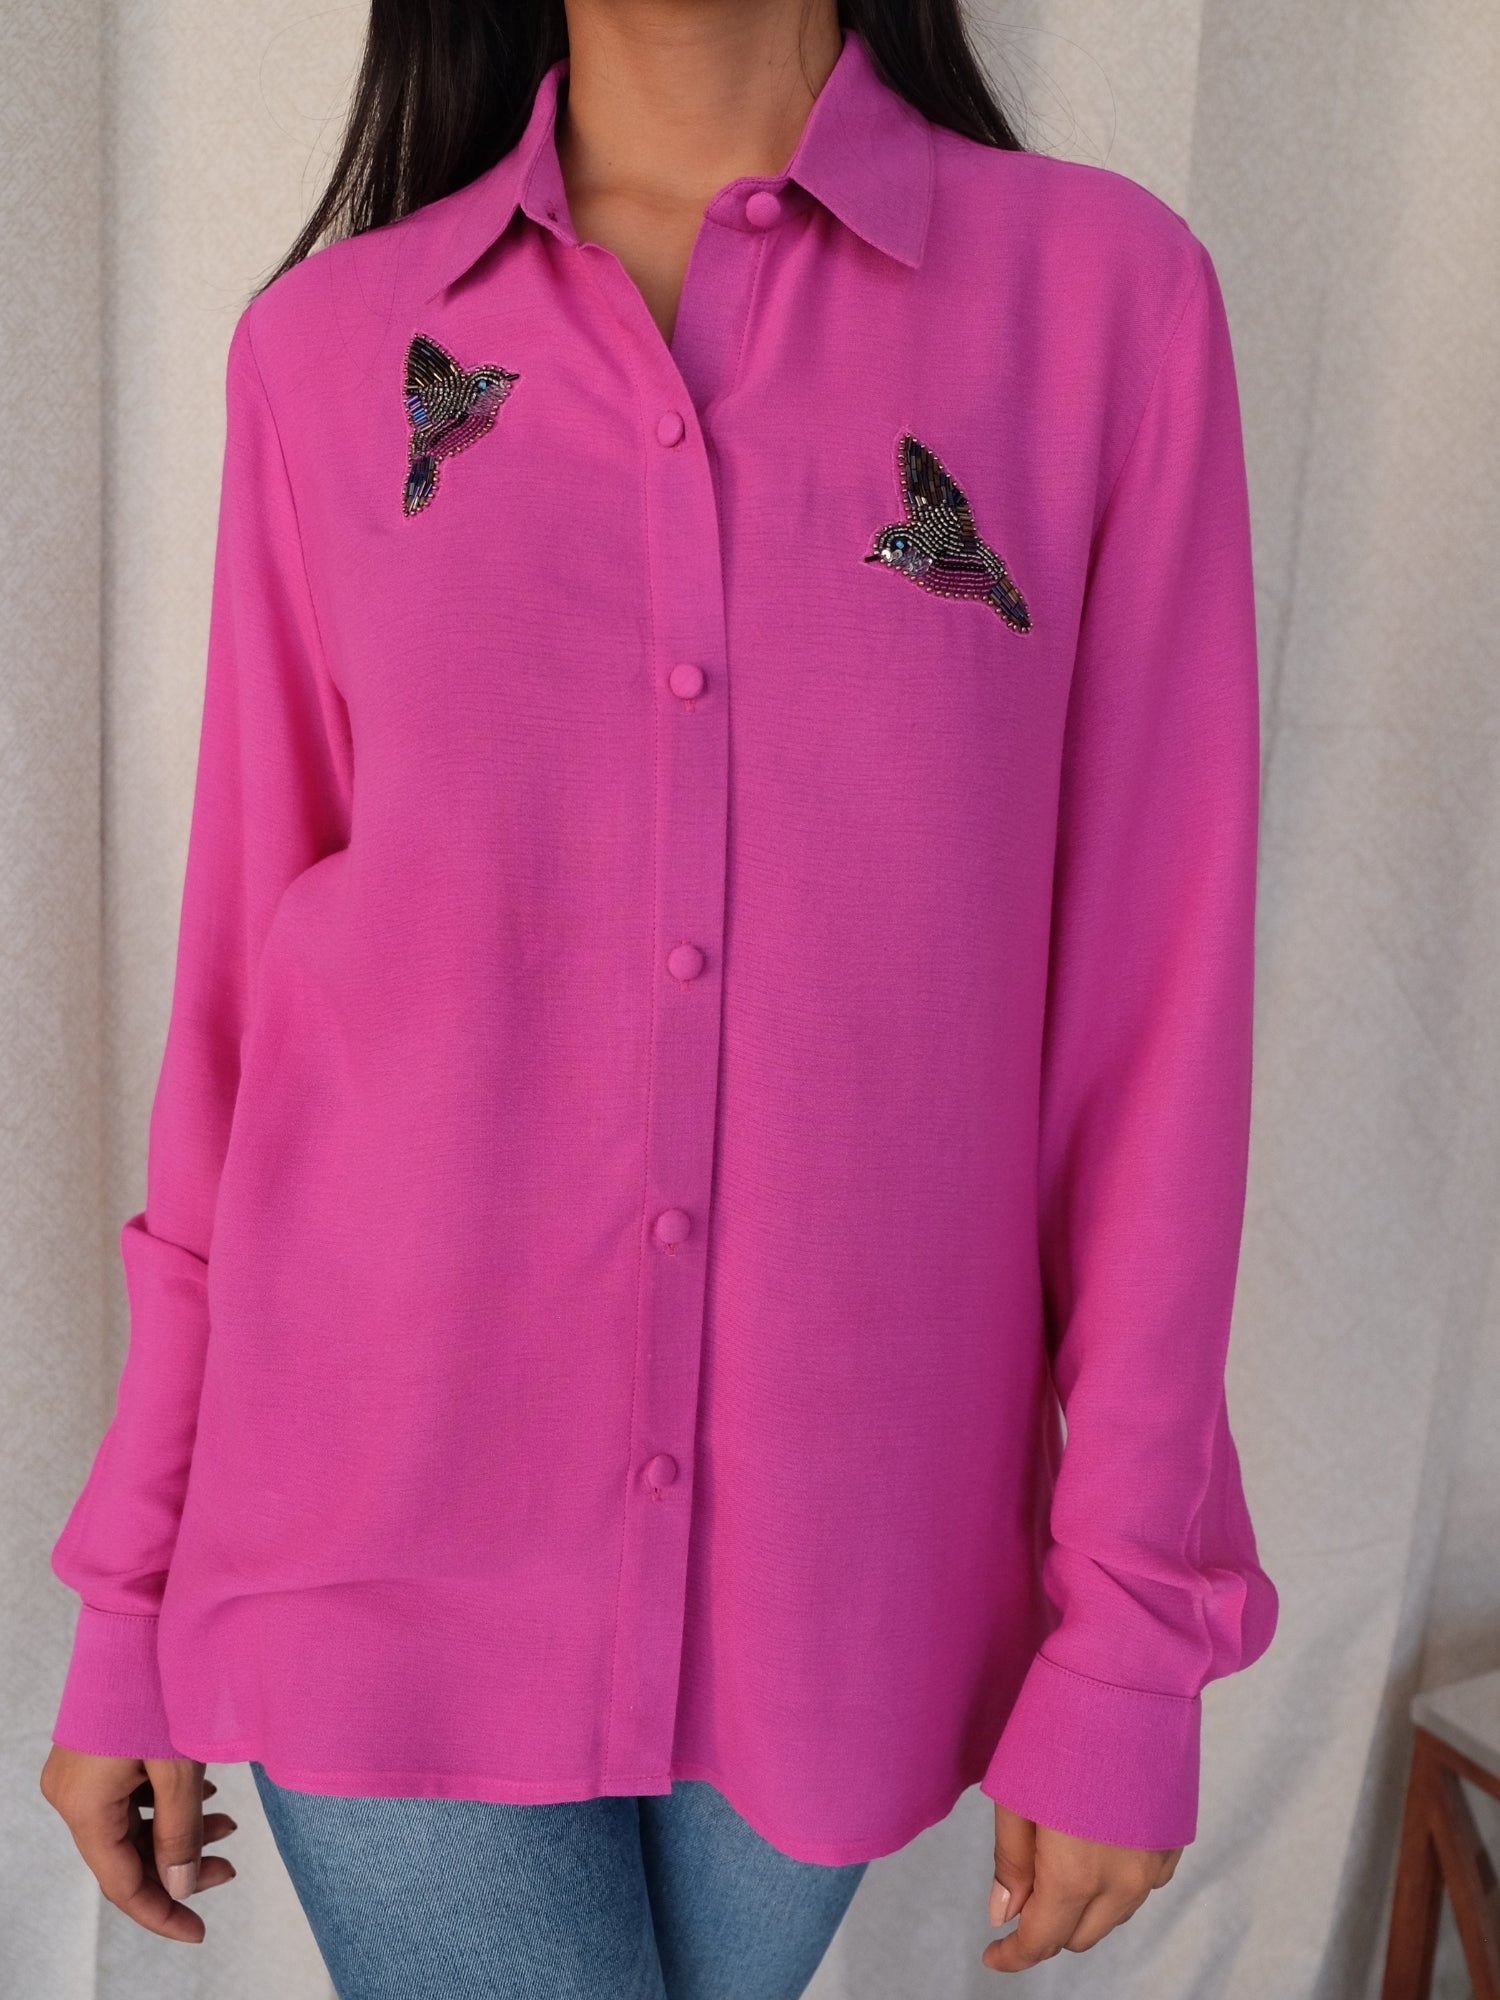 Deluxe Pink Embroidery Shirt